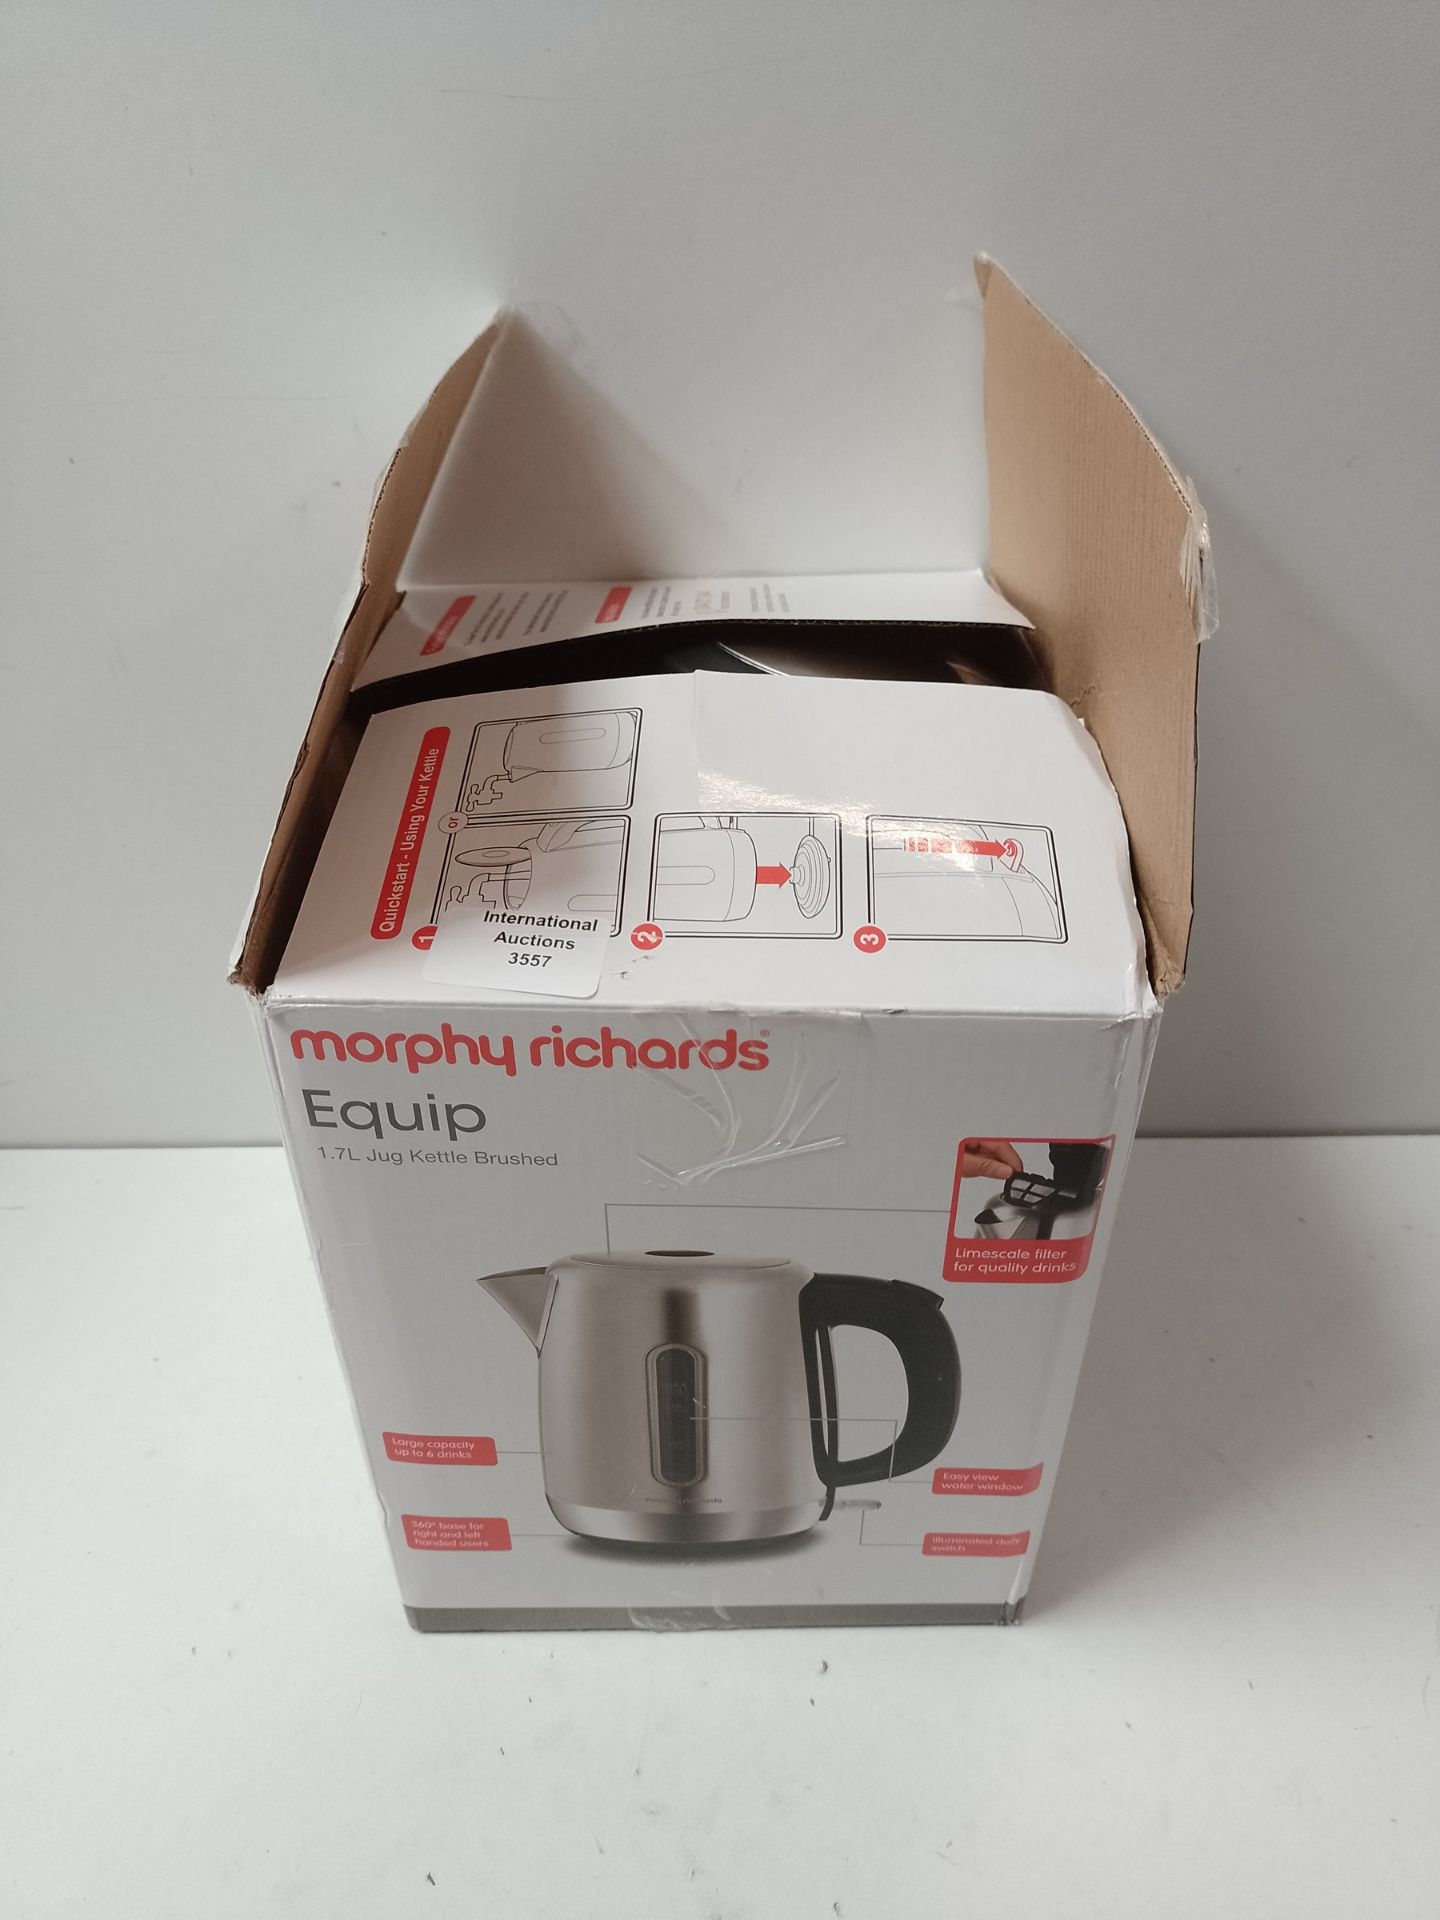 RRP £22.82 Enocos Electric Kettle - Image 2 of 2